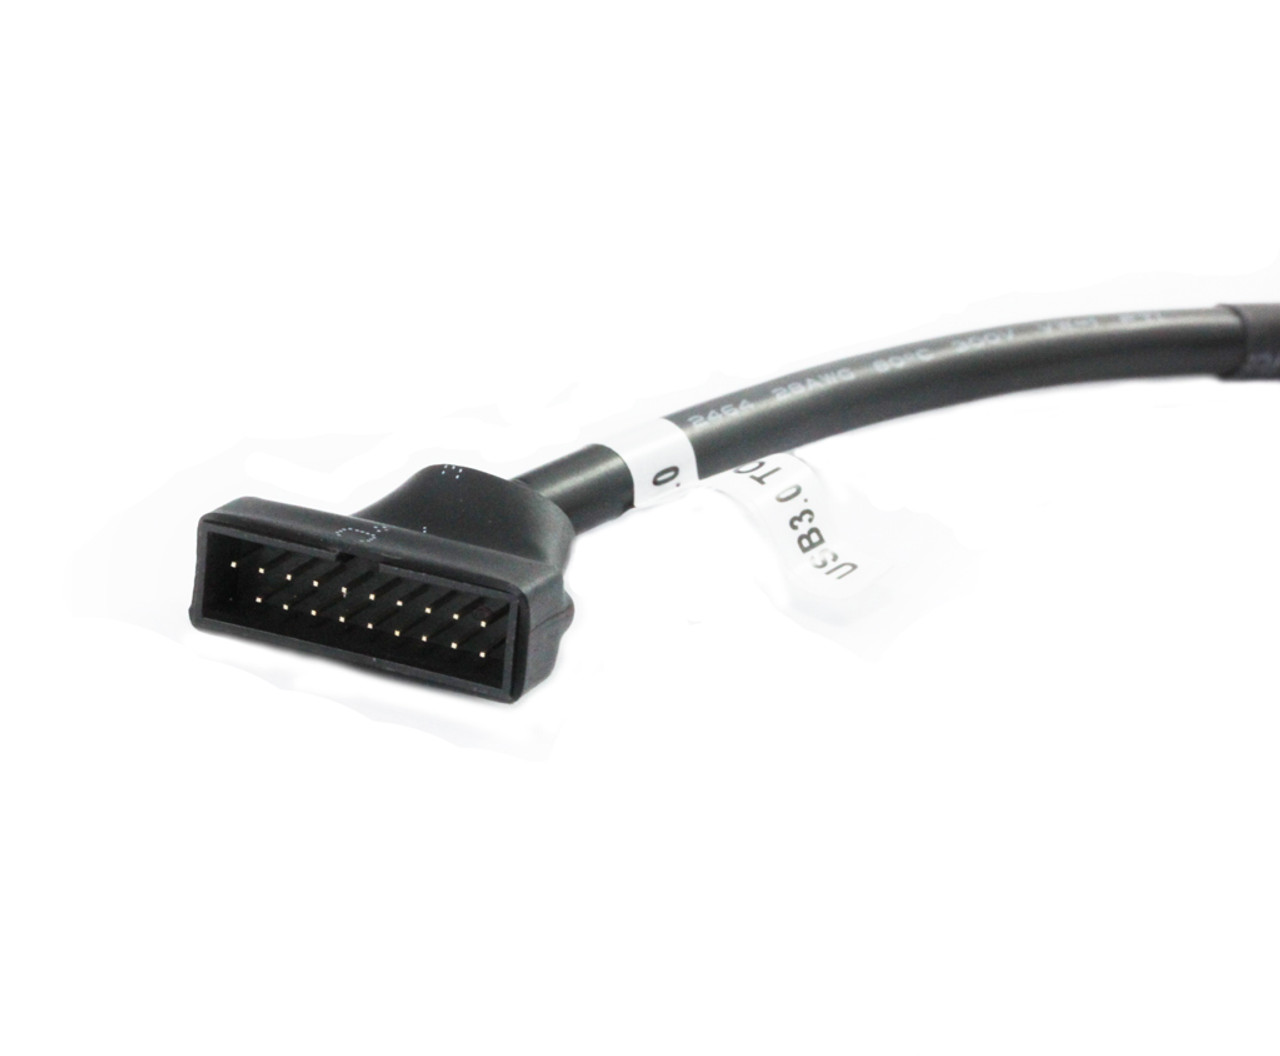 15CM USB 2.0 to USB 3.0 Converter Cable